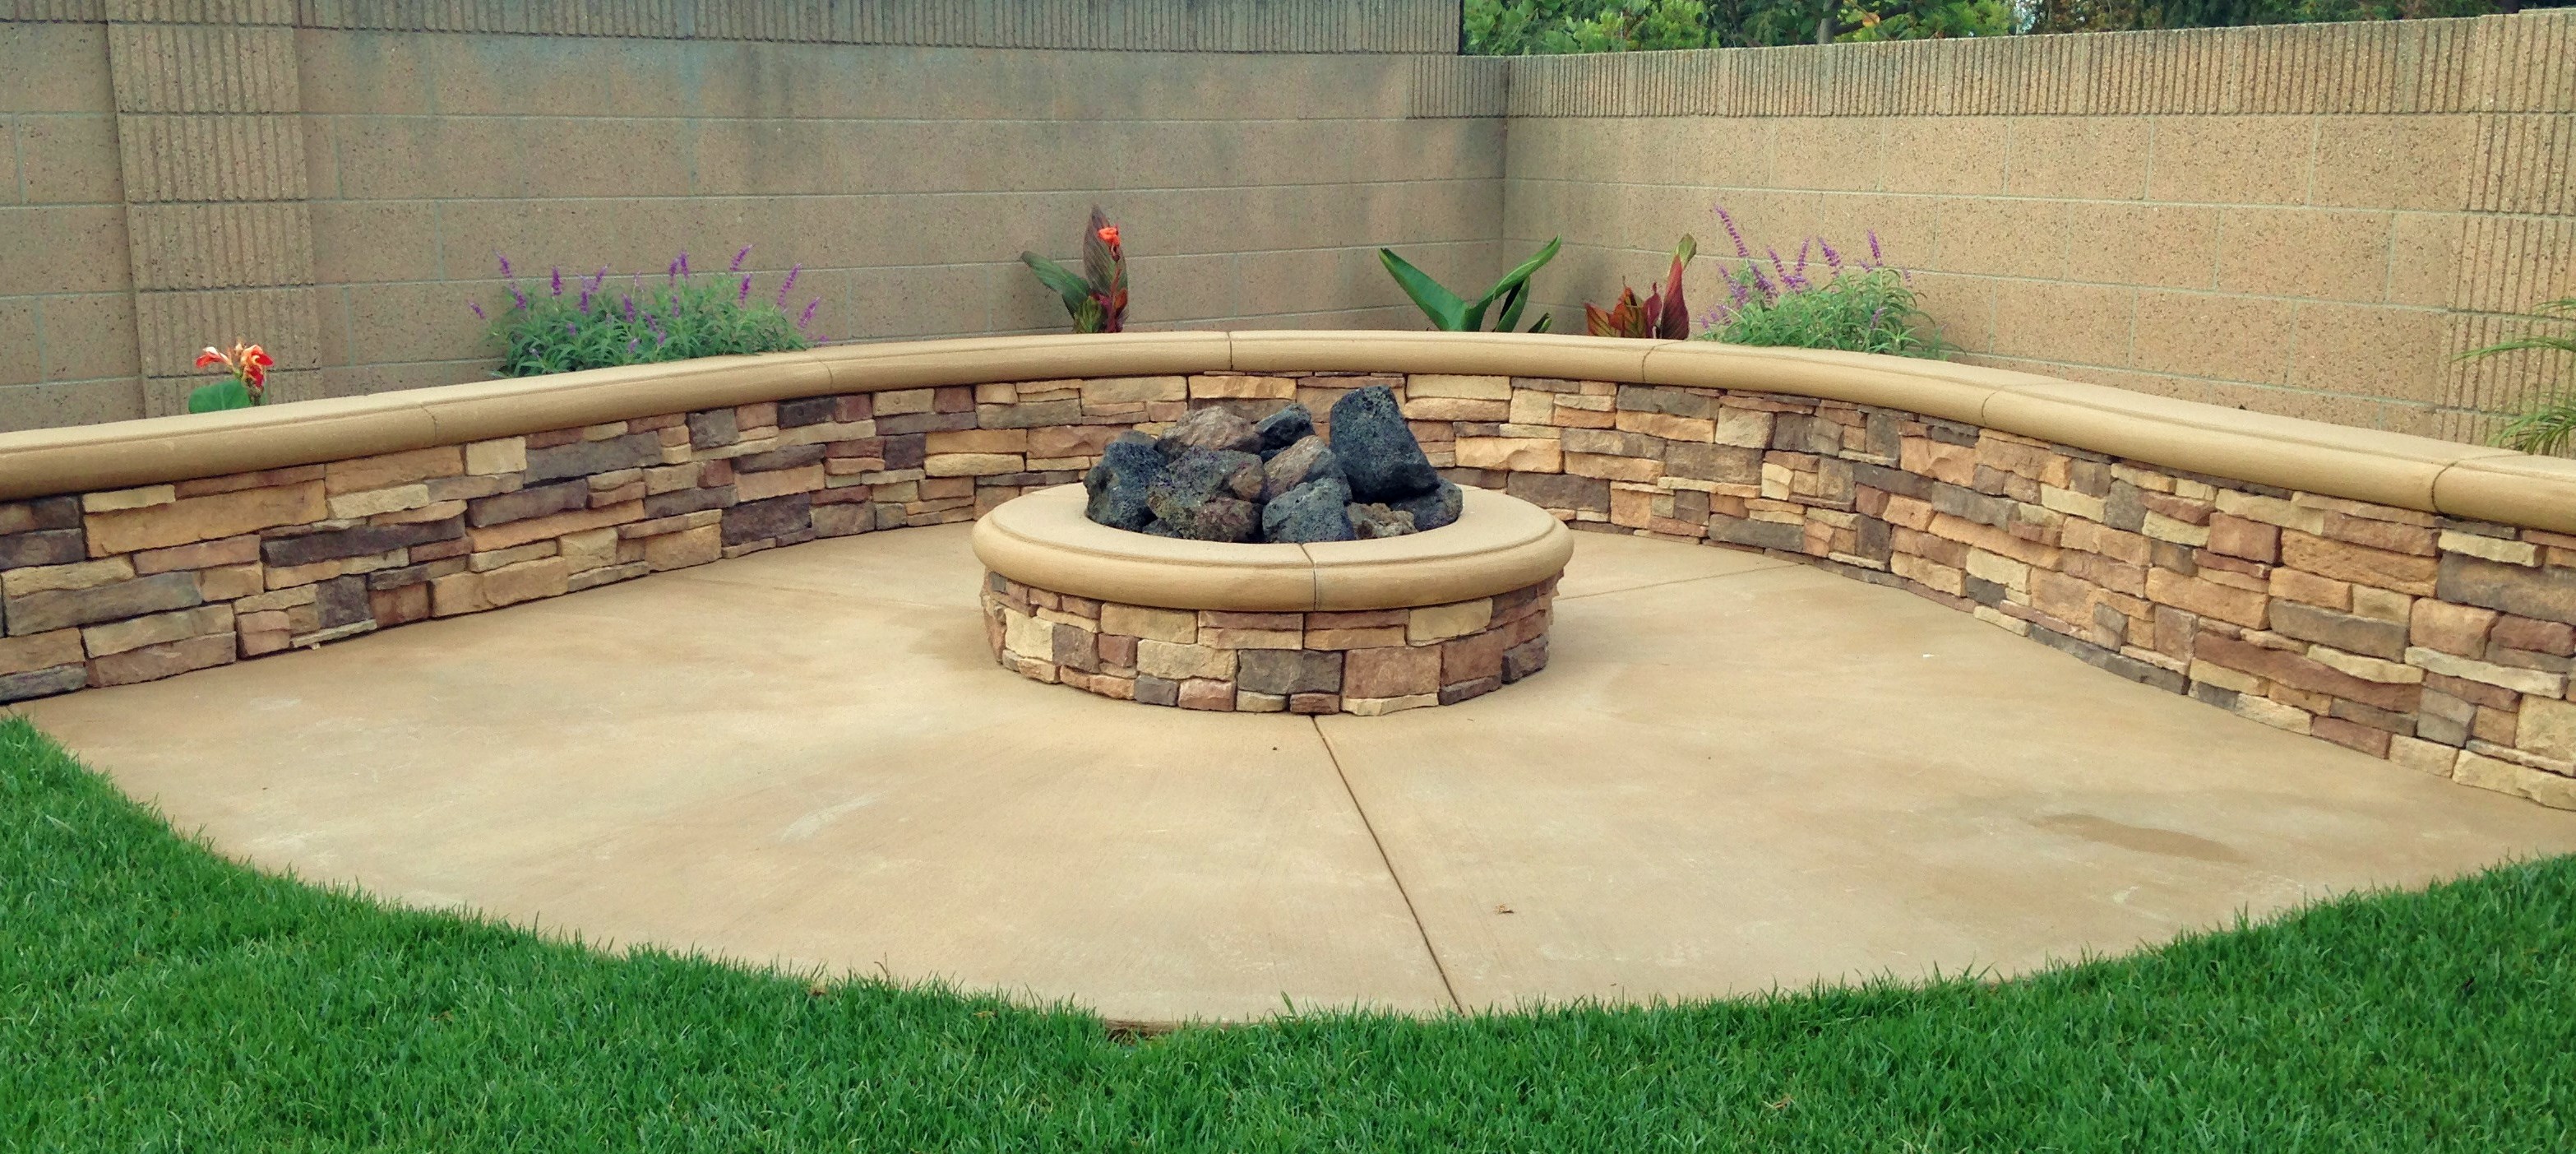 Fire Pits Orange County Patio Areas, Can You Put Fire Pit On Concrete Patio